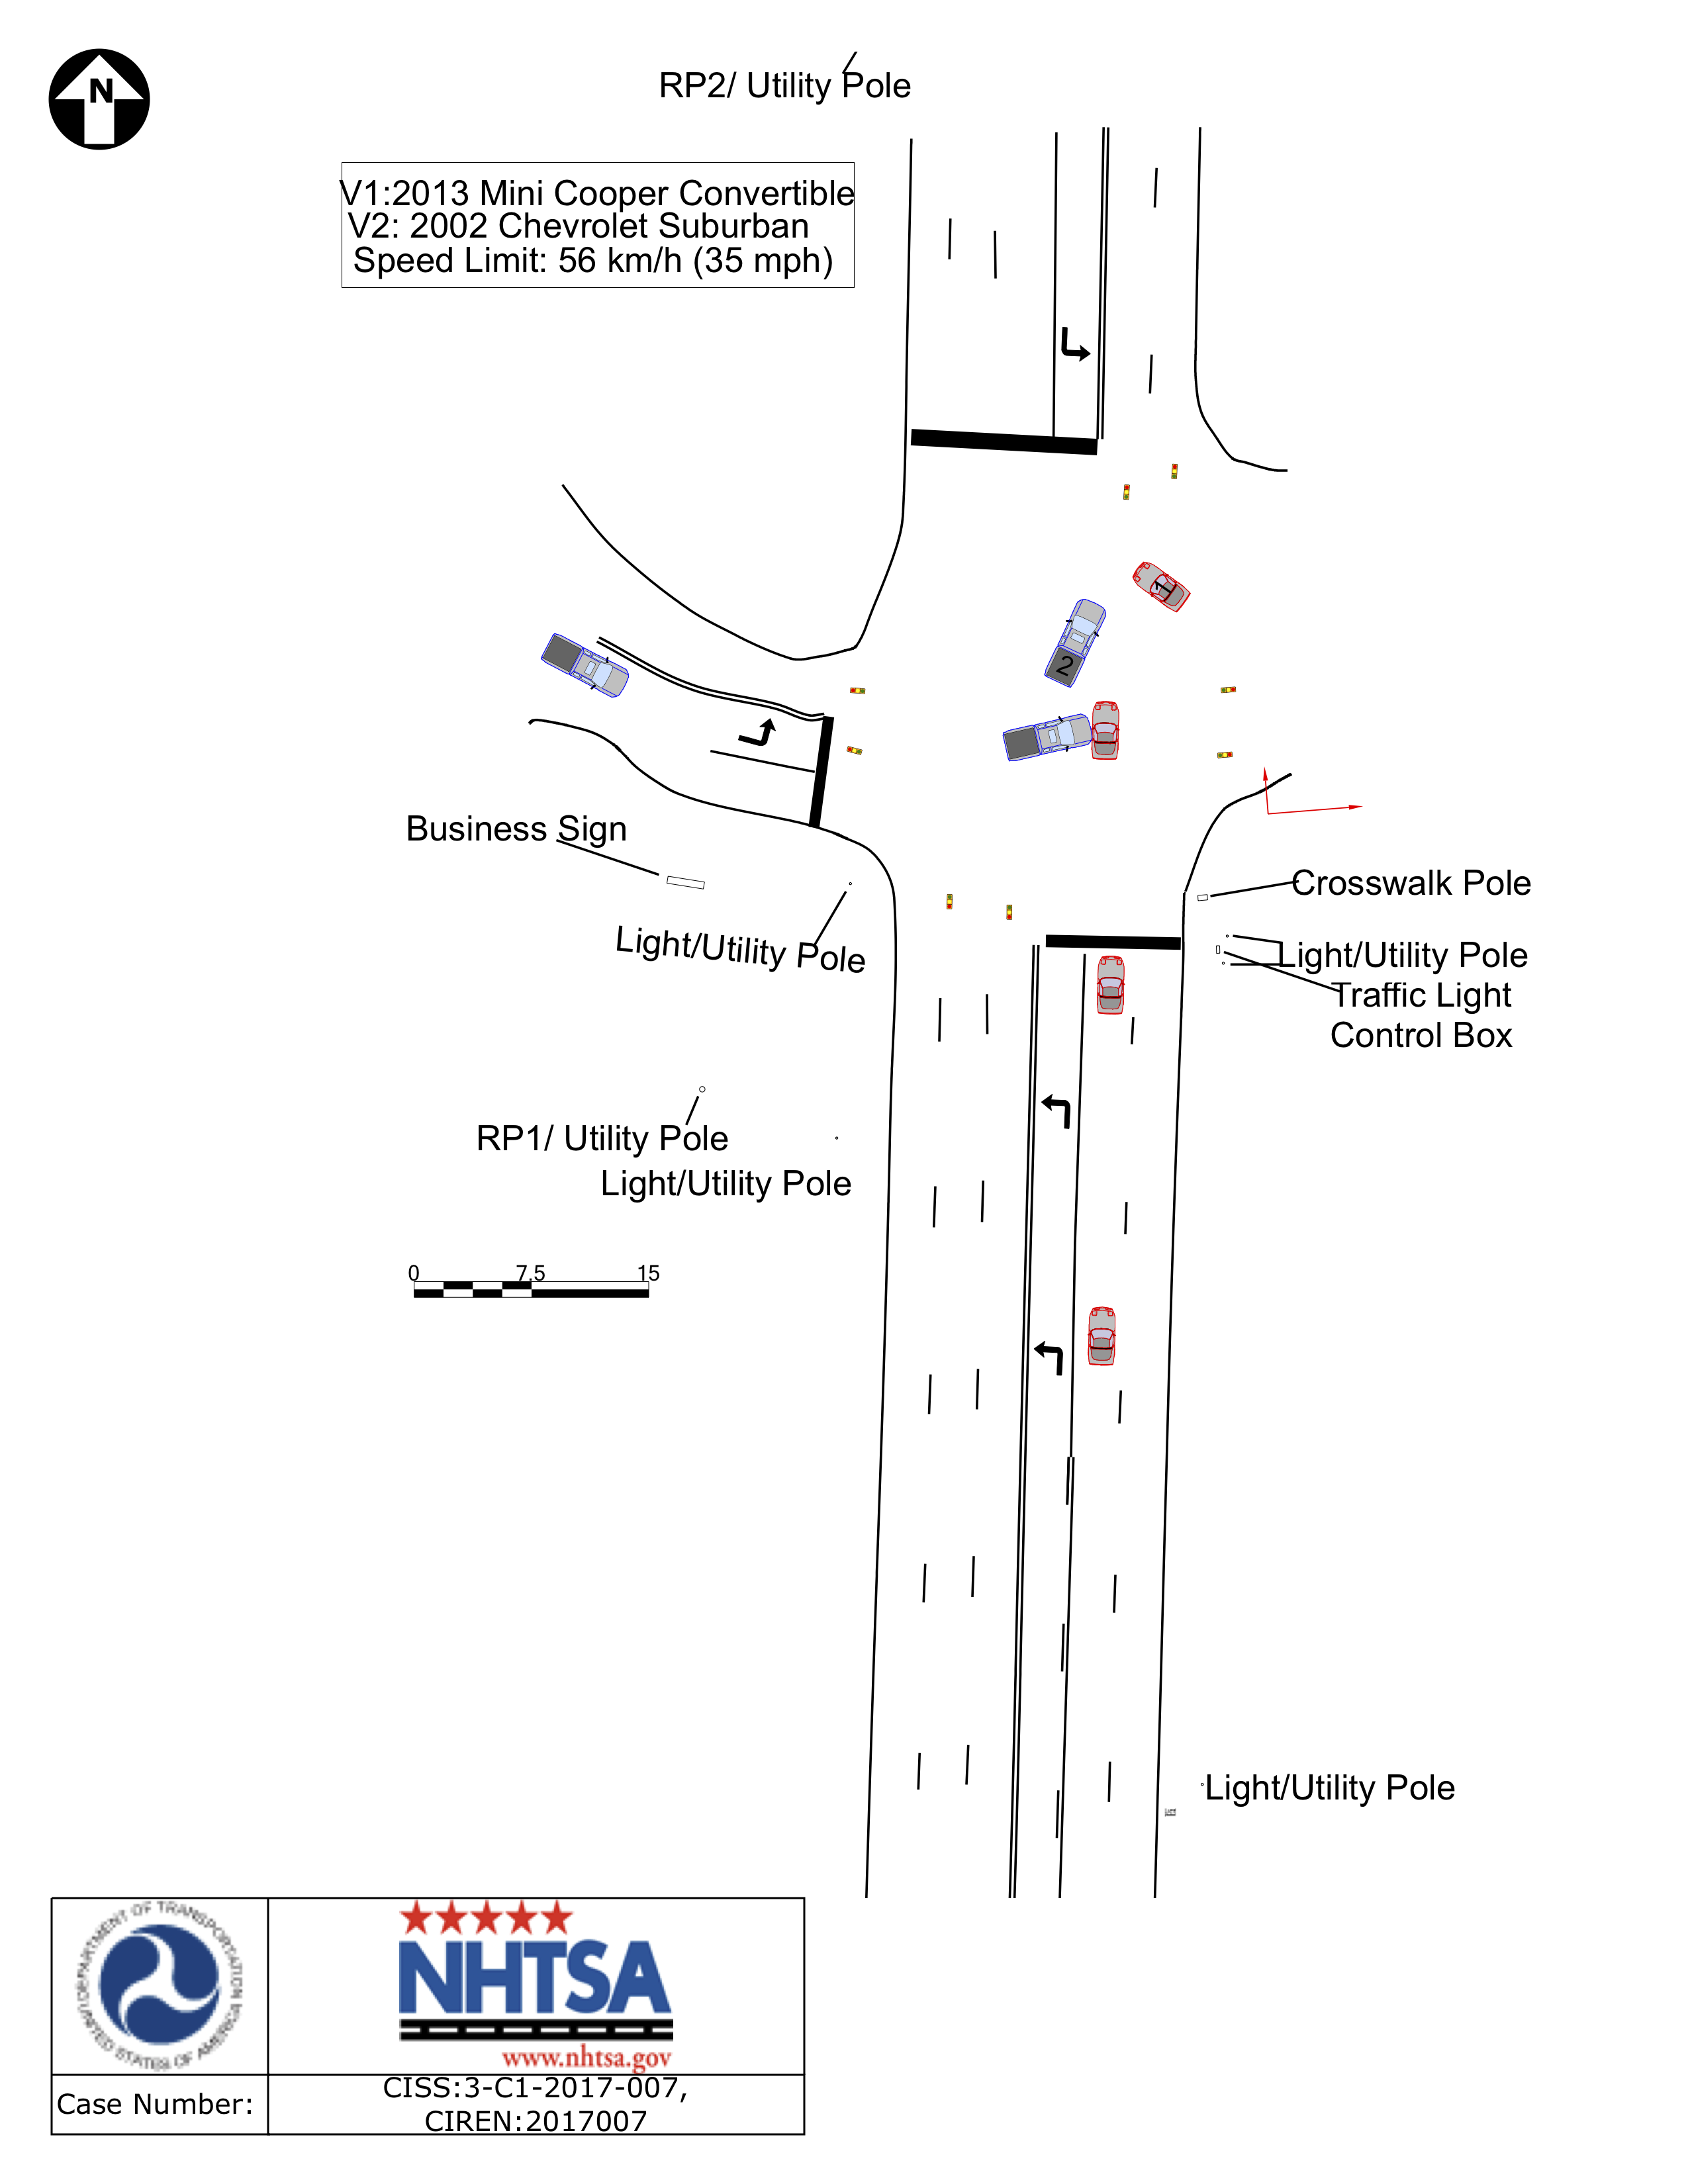 A vehicle crash diagram showing two vehicles impacting in an intersection